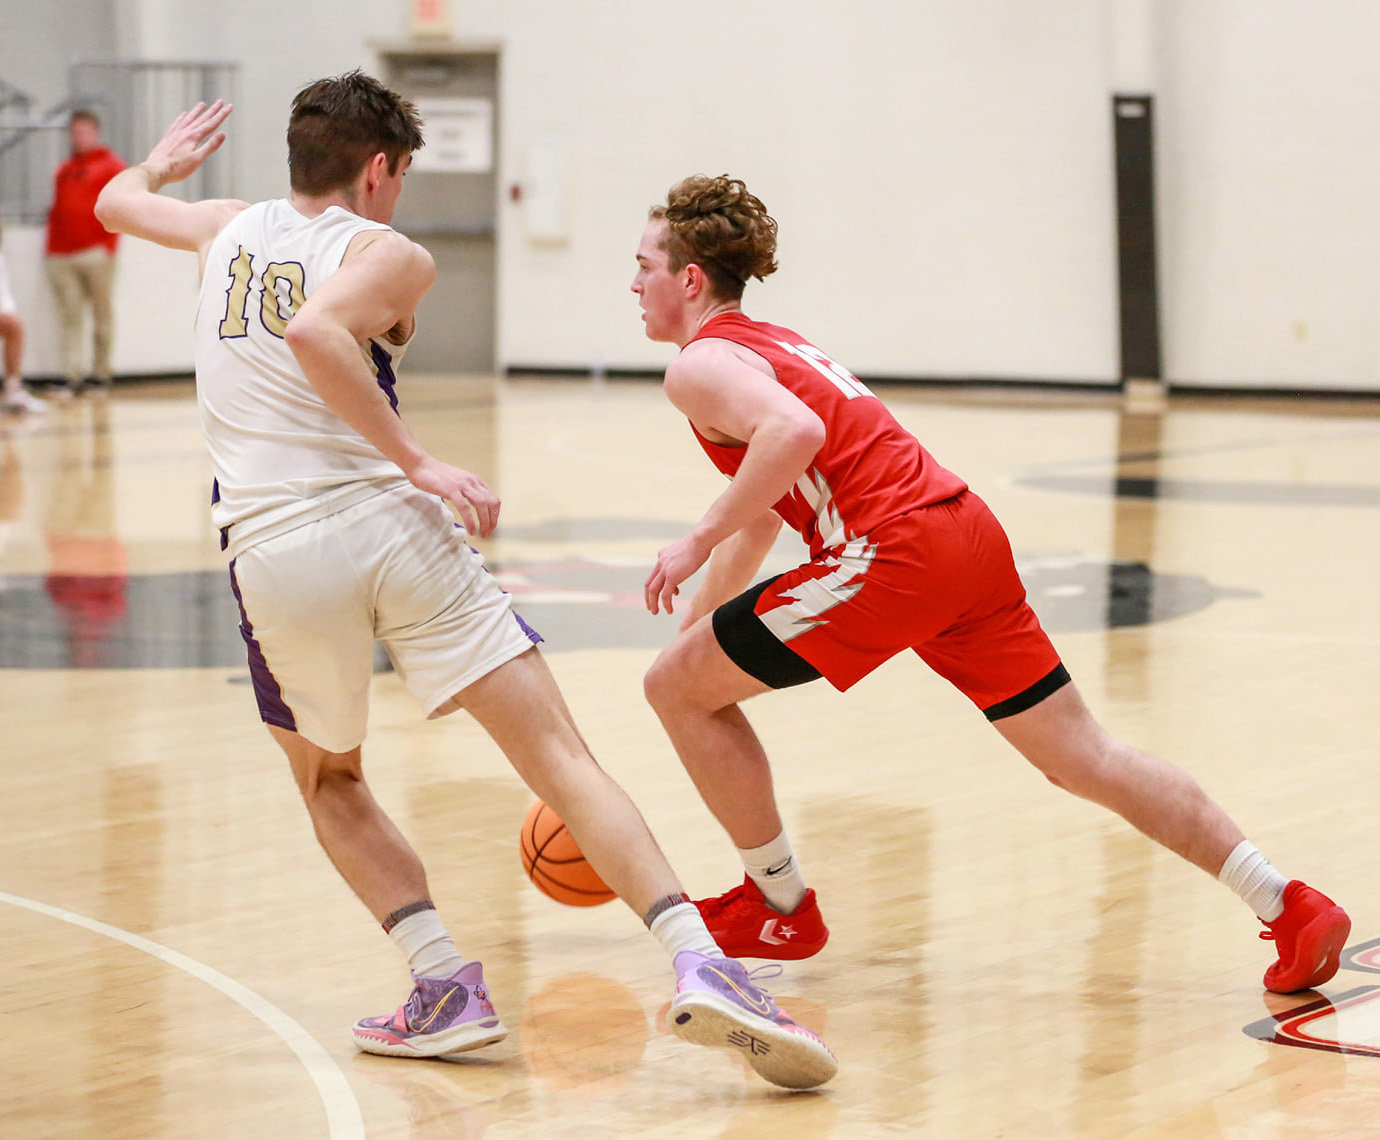 Purcell junior Lincoln Eubank drives with the ball during the Dragons’ 62-53 win over CCS in the Regional basketball tournament at Meeker. Eubank scored 11 points in the win.